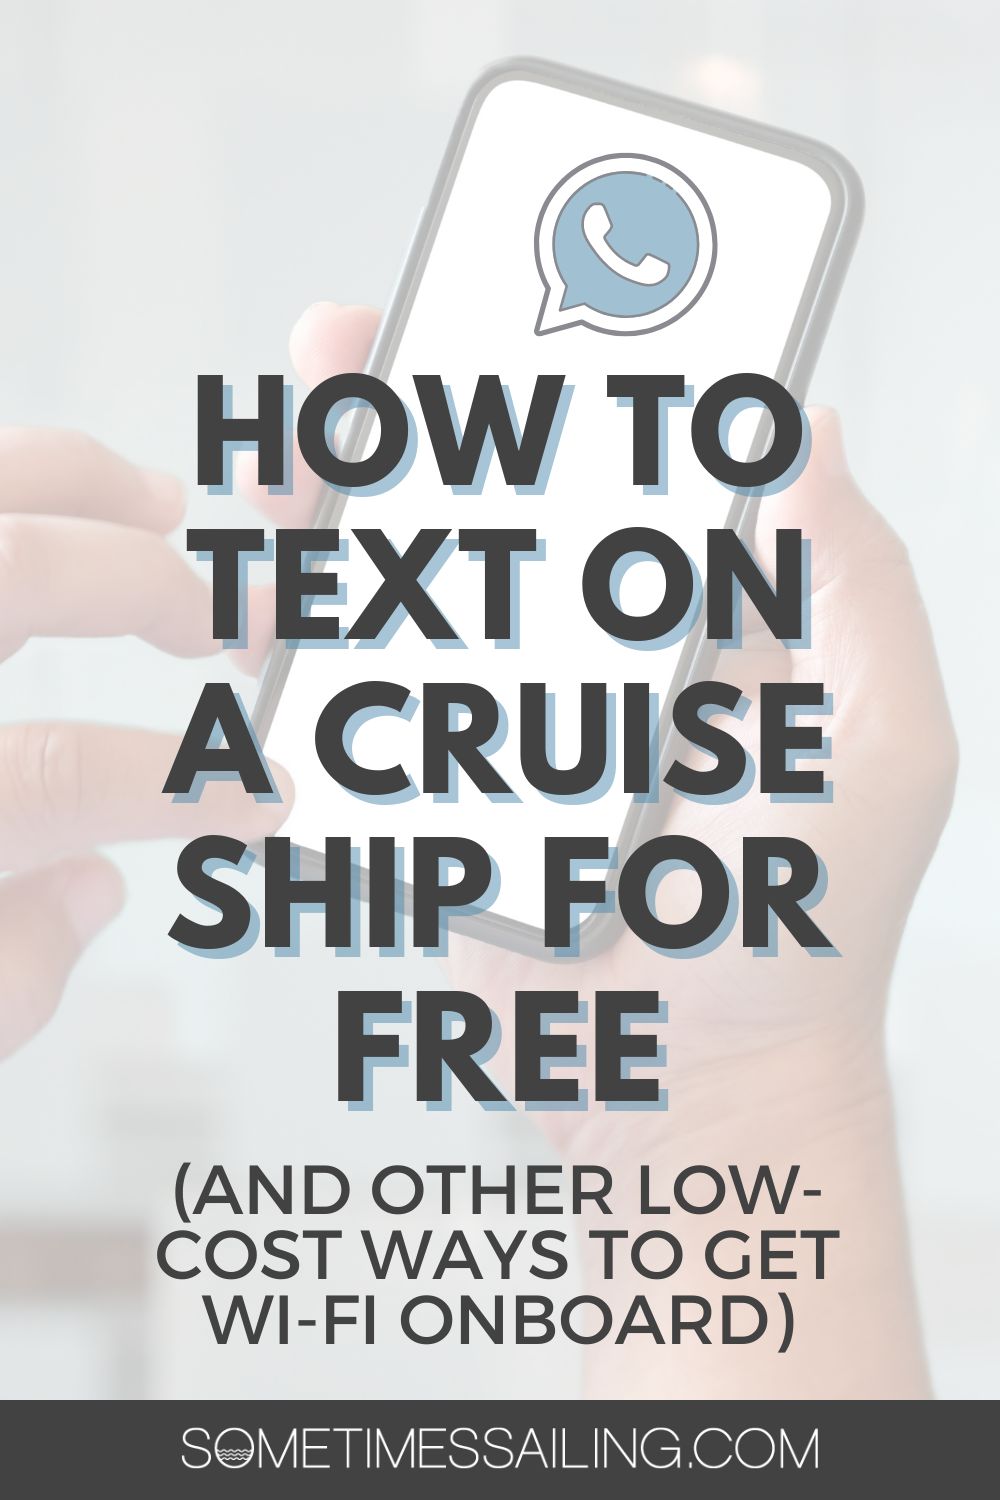 How to Text on a Cruise Ship for Free (and Other low-cost Ways to Get Wi-Fi Onboard) with a faded picture of hands holding a cell phone behind it